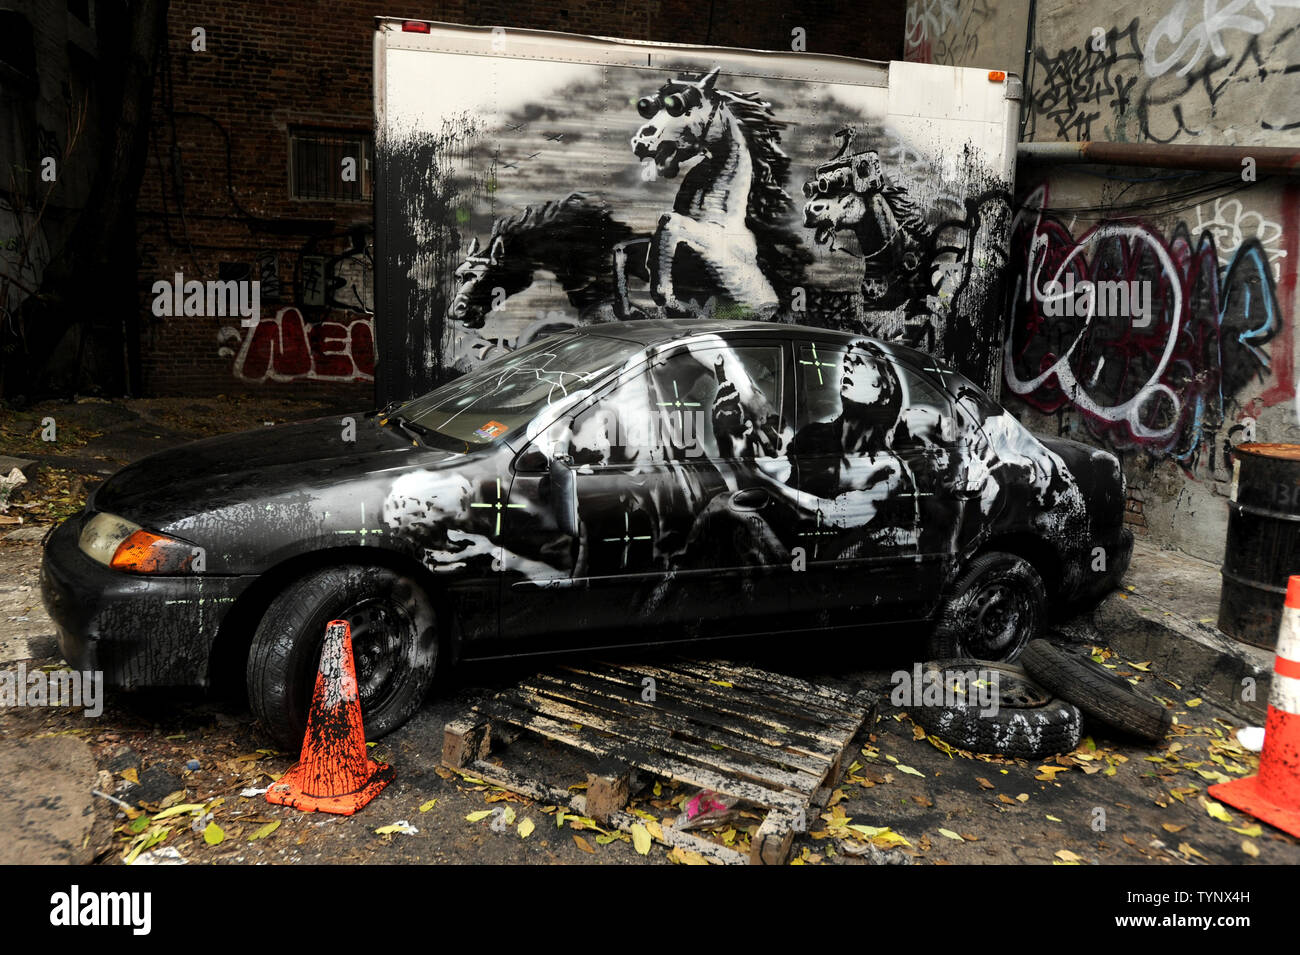 An art work created by British street artist Banksy stands outside in the East Village of Manhattan in New York City in October of 2013. Banksy is a pseudonymous England-based graffiti artist, political activist, film director, and painter. His satirical street art and subversive epigrams combine dark humor with graffiti done in a distinctive stenciling technique.    UPI/Dennis Van Tine Stock Photo